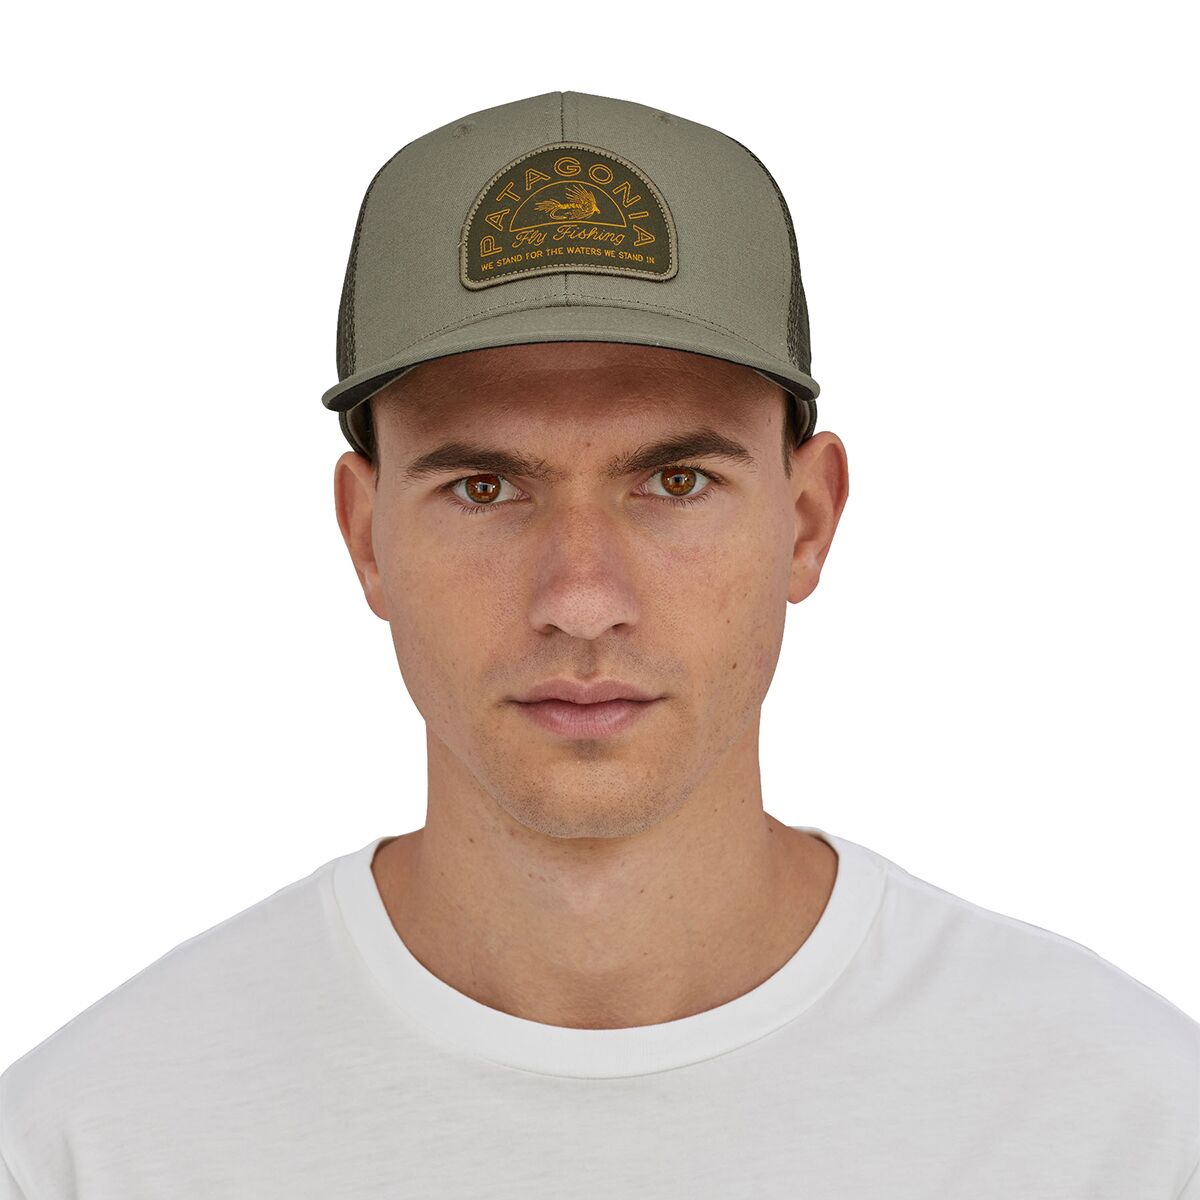 Patagonia Take a Stand Trucker Hat - Accessories